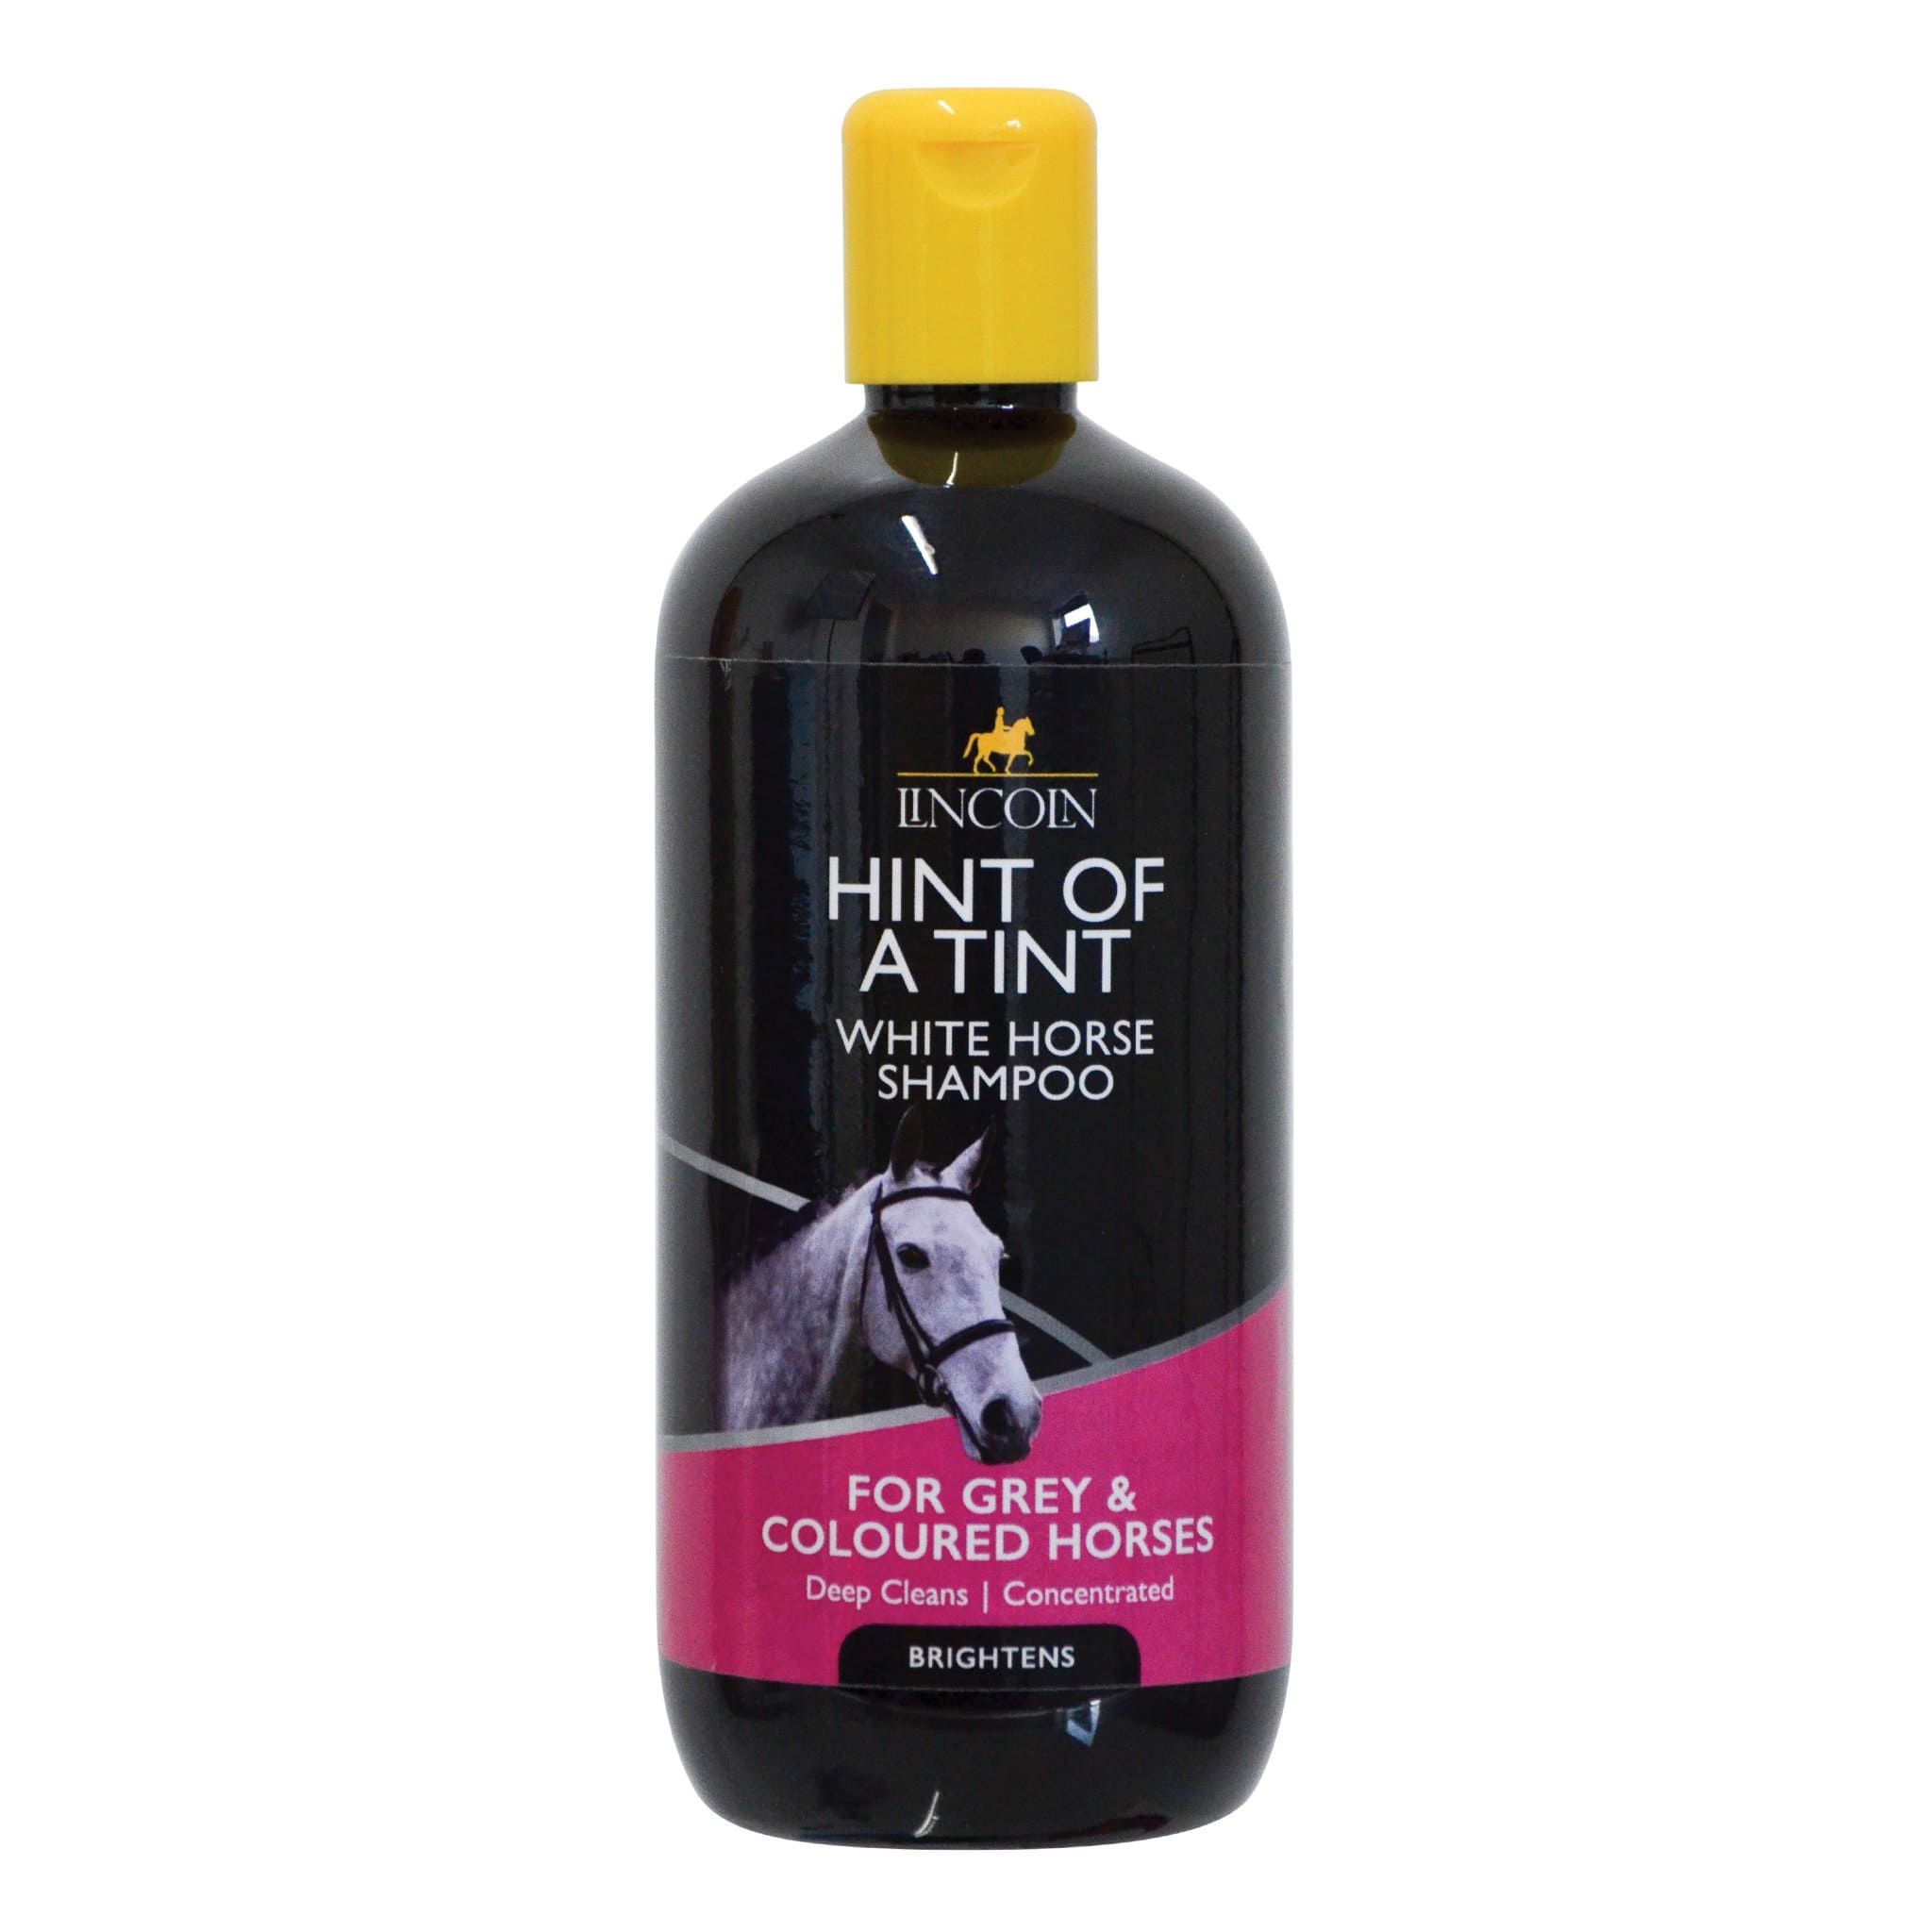 Lincoln Hint of a Tint White Horse Shampoo 4120